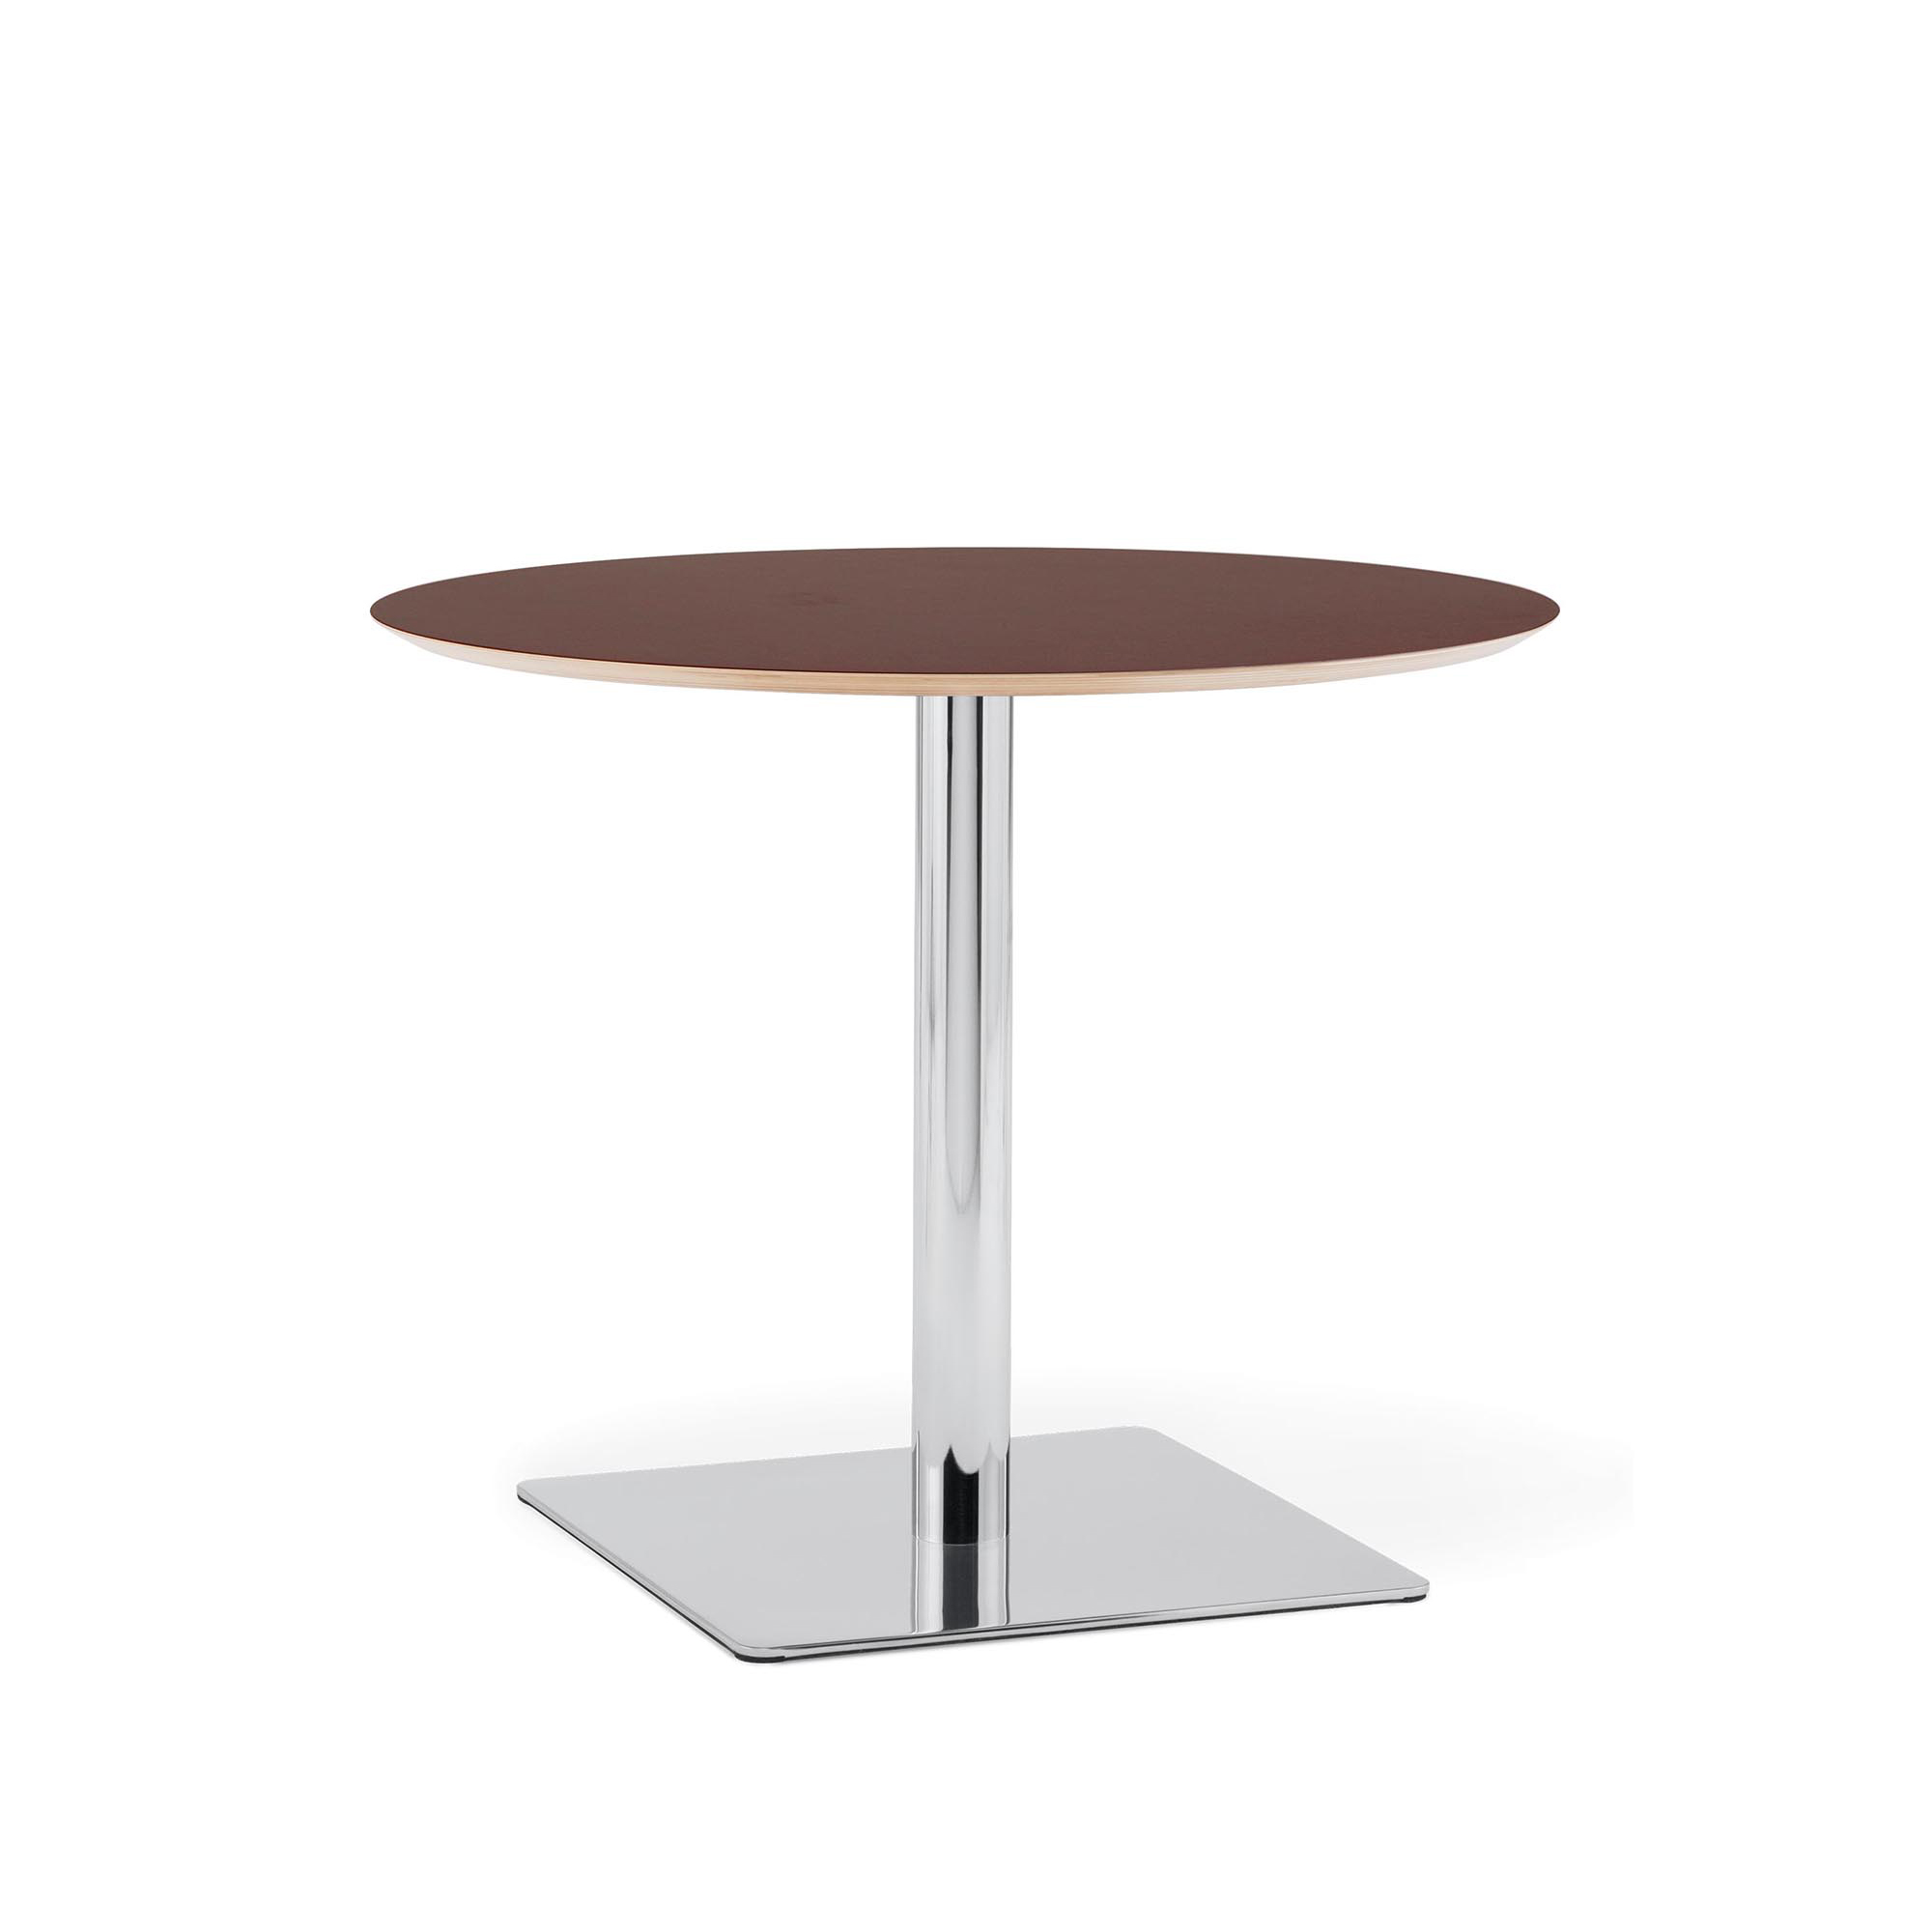 Skyline Meeting Table, Round Top